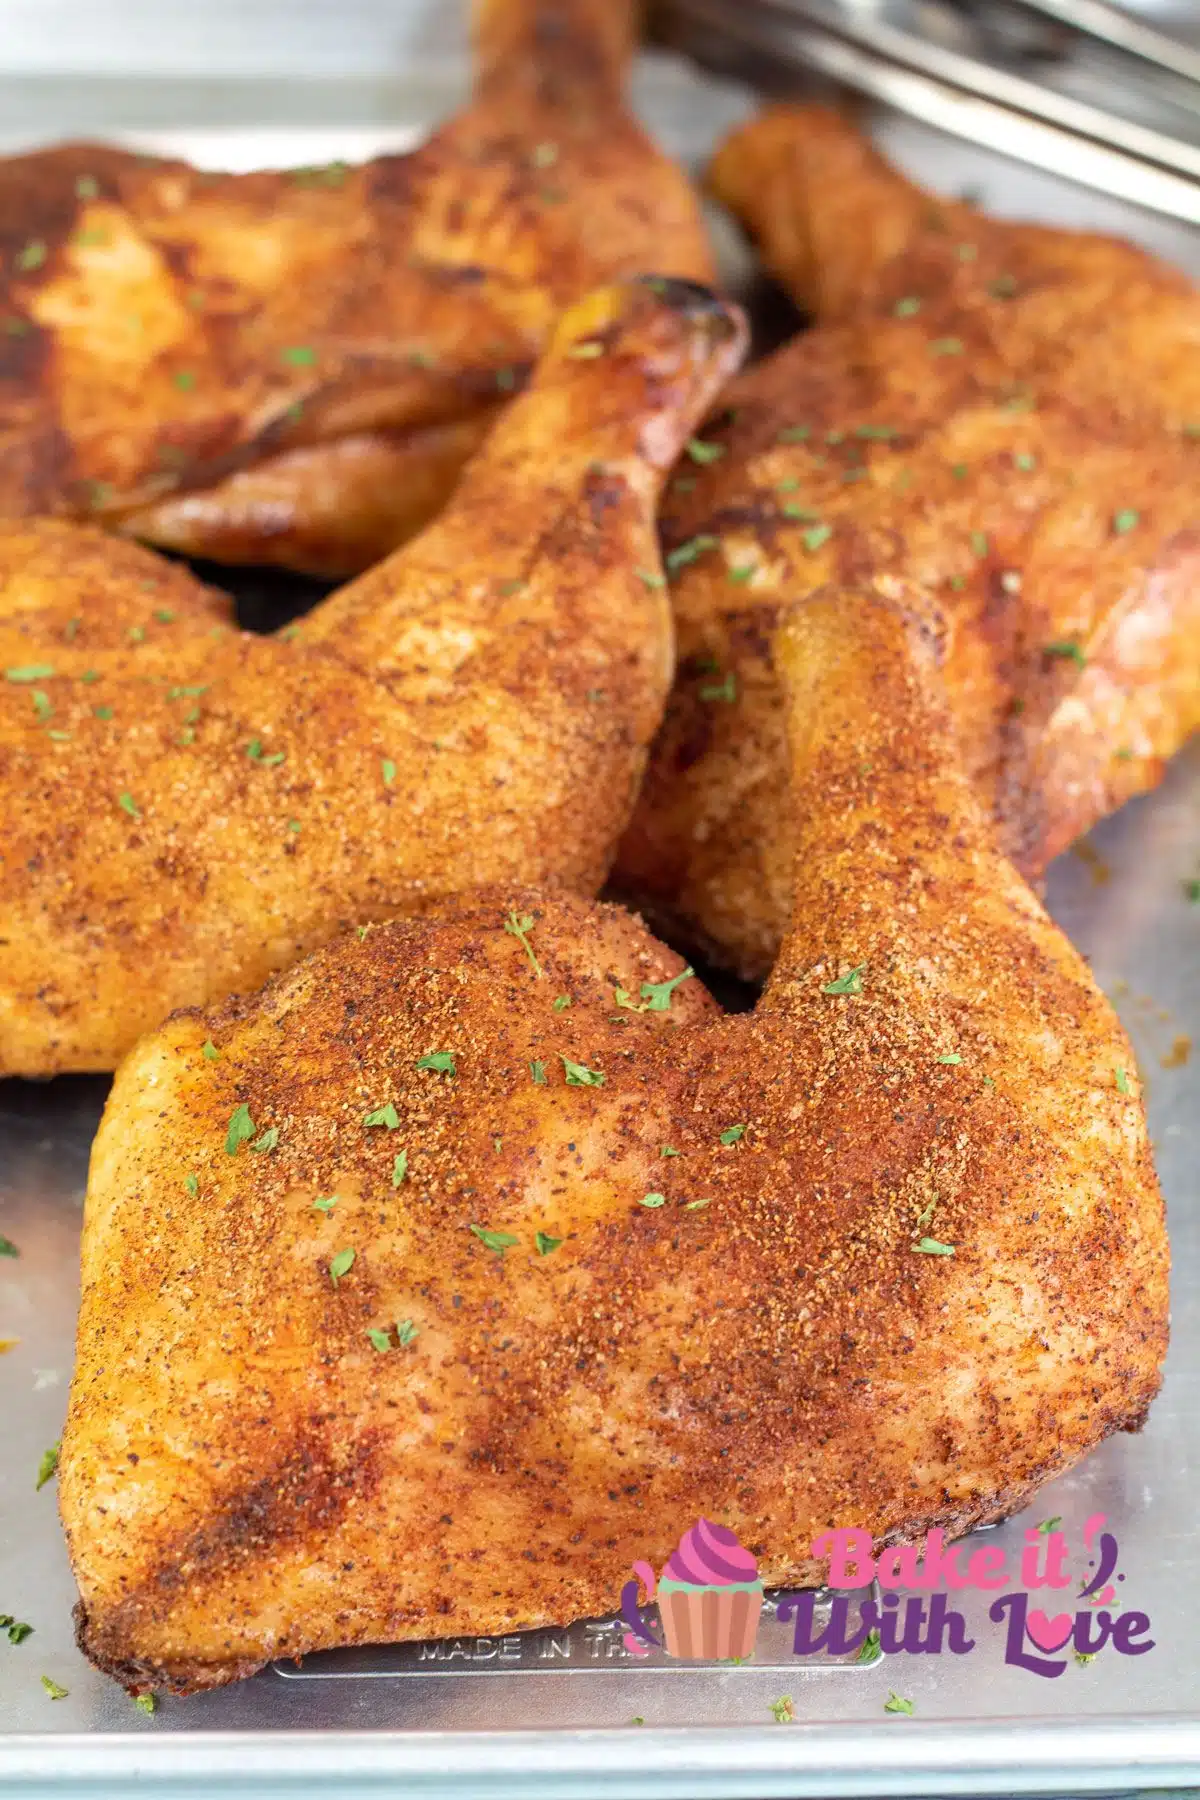 Tall image showing smoked chicken leg quarters.